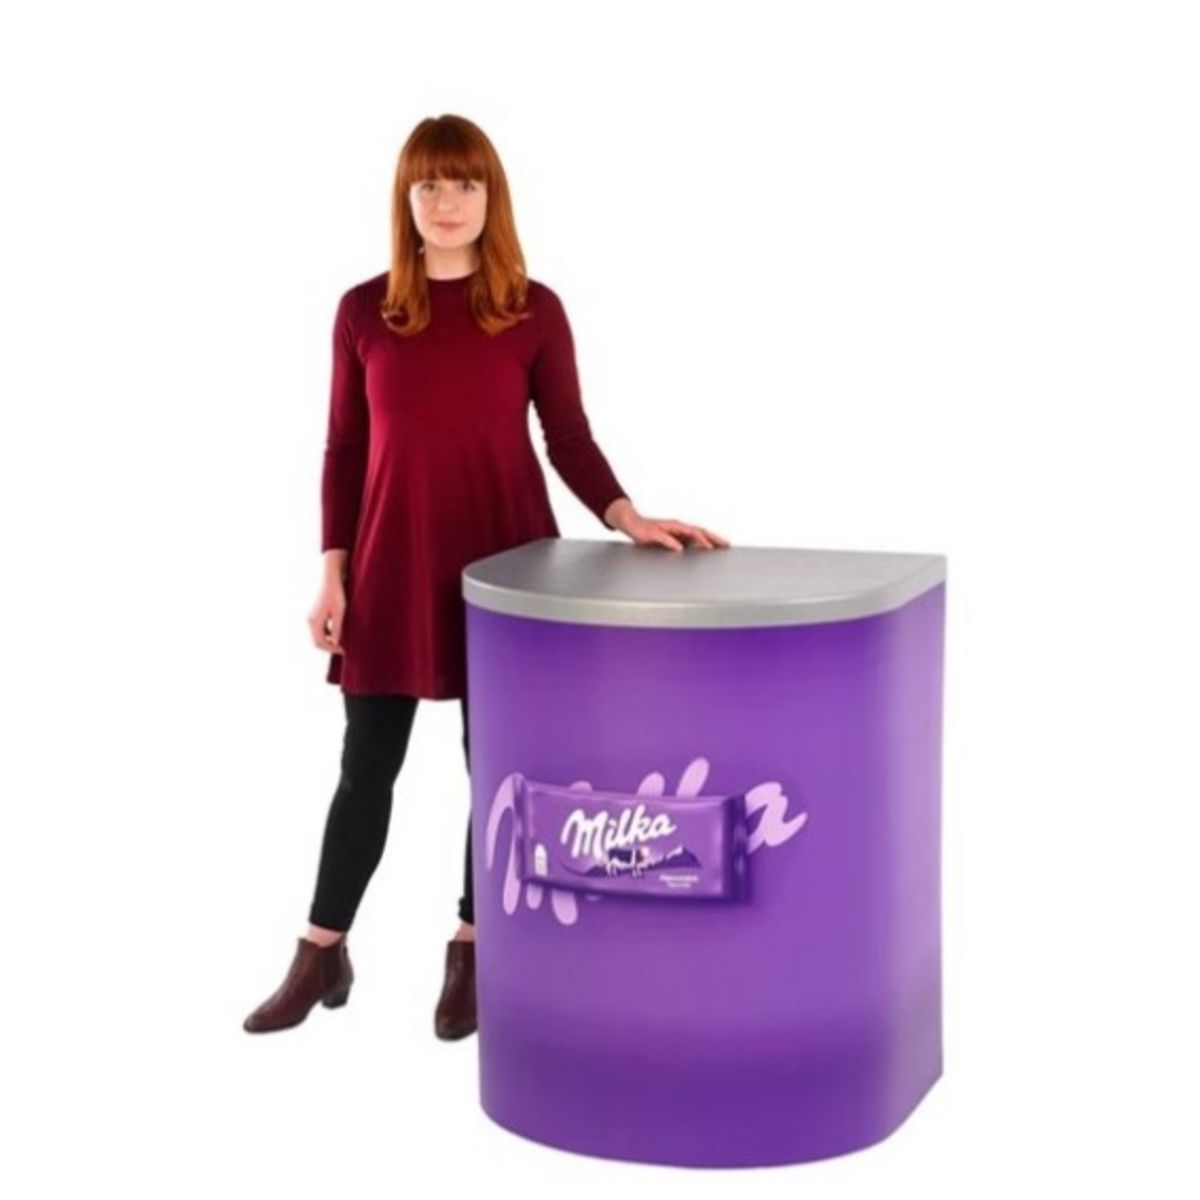 lady standing next to Branded Rapido Demonstration counter no header.jpg